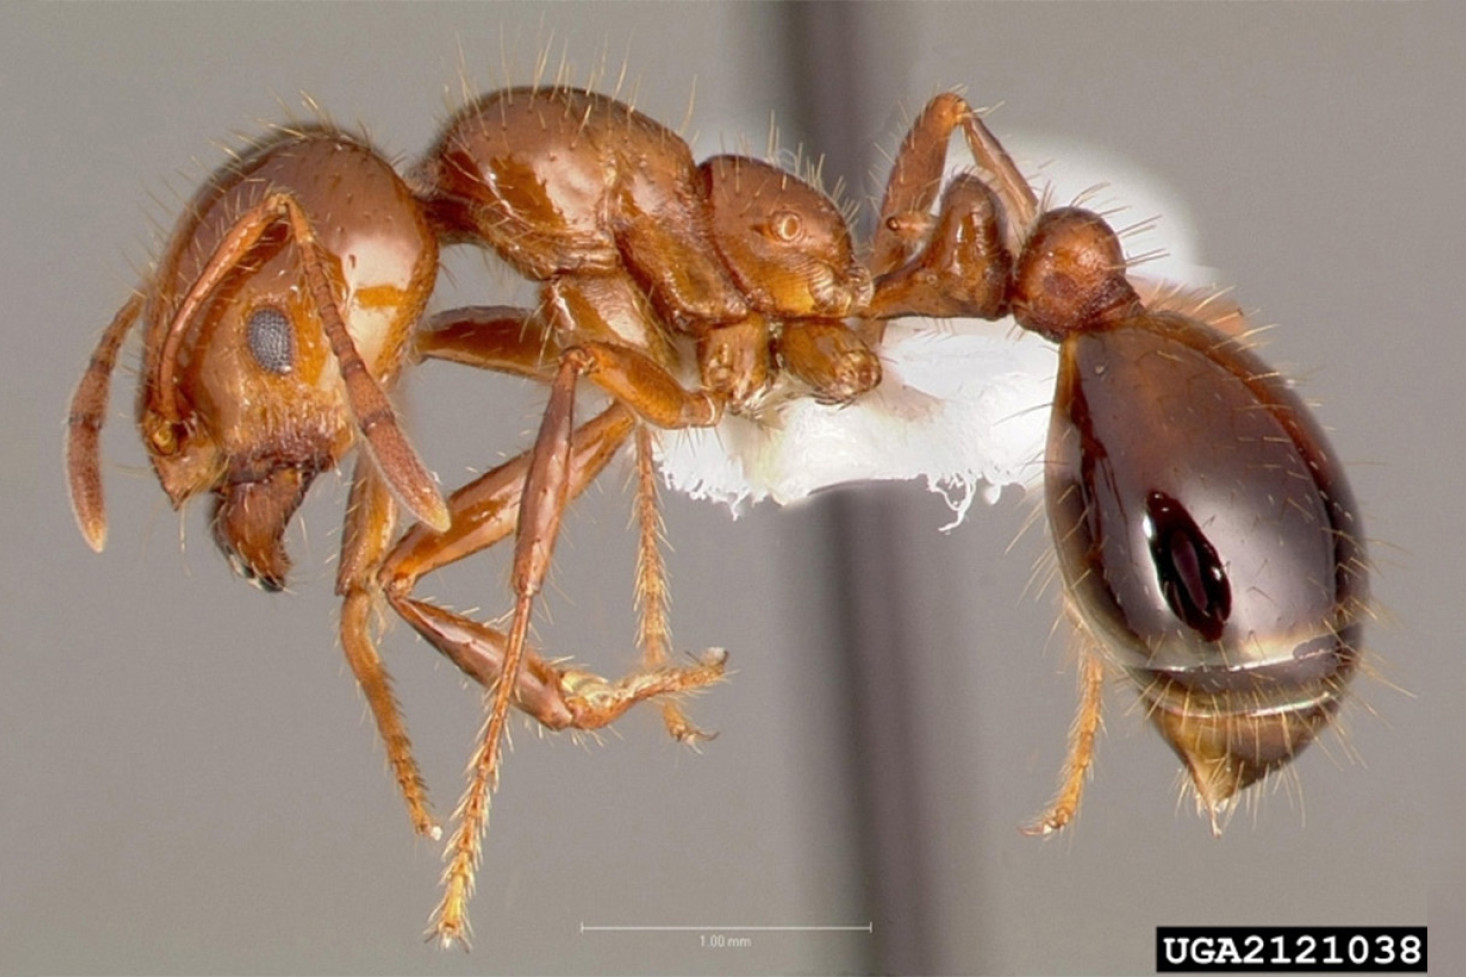 Fire ants are small, copper-coloured and swarm aggressively when provoked.